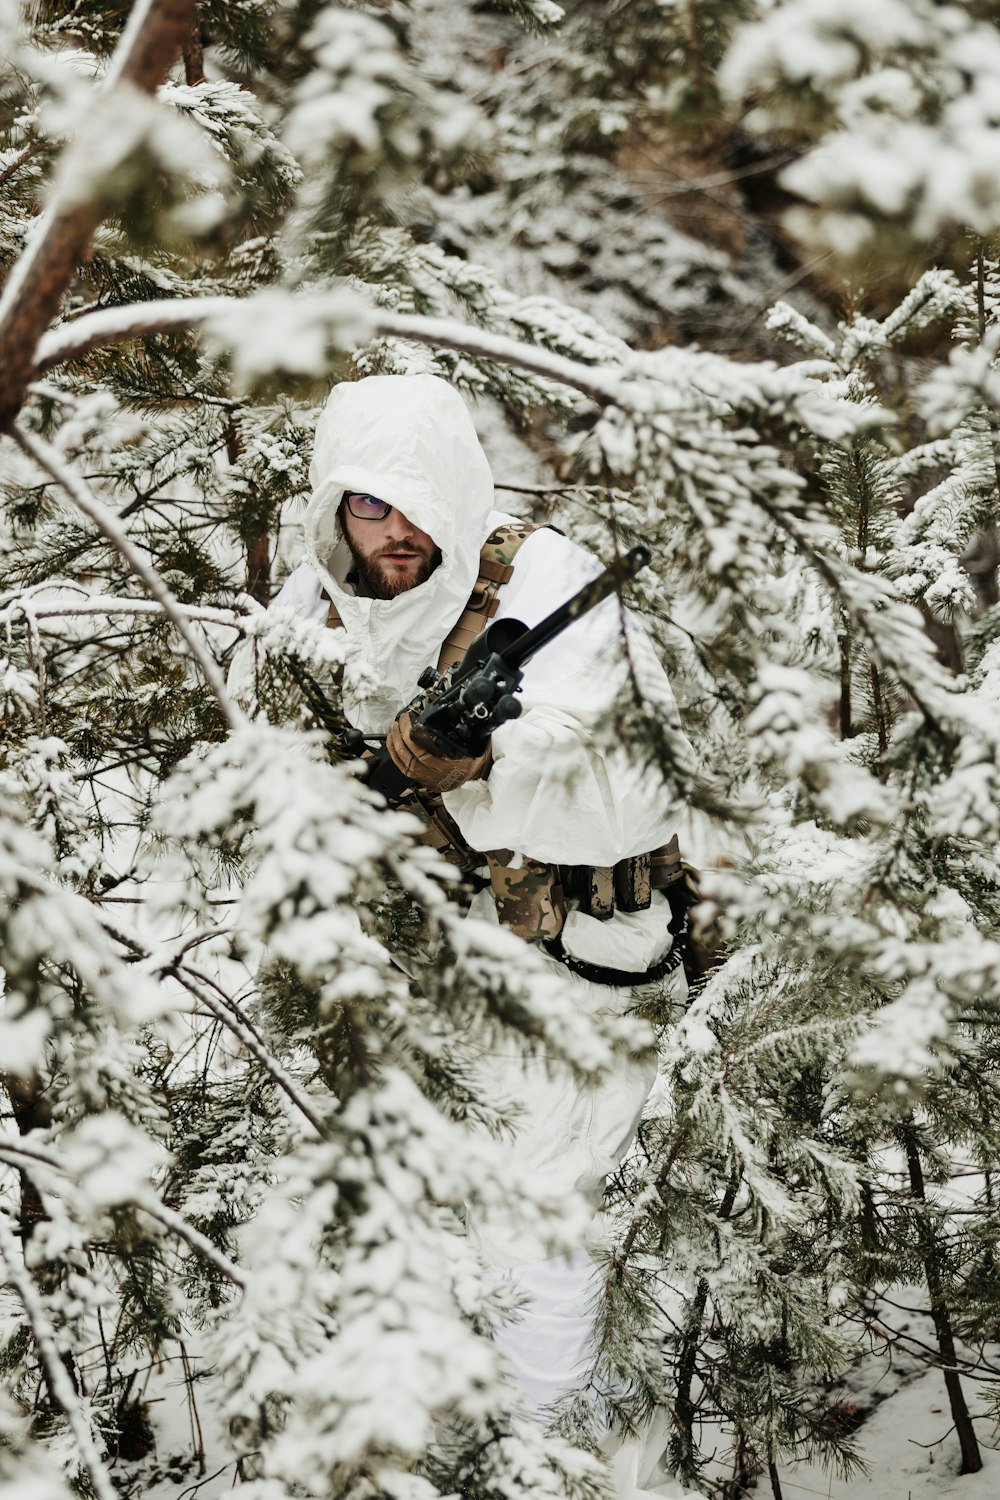 a man in a white outfit holding a gun in a snowy forest